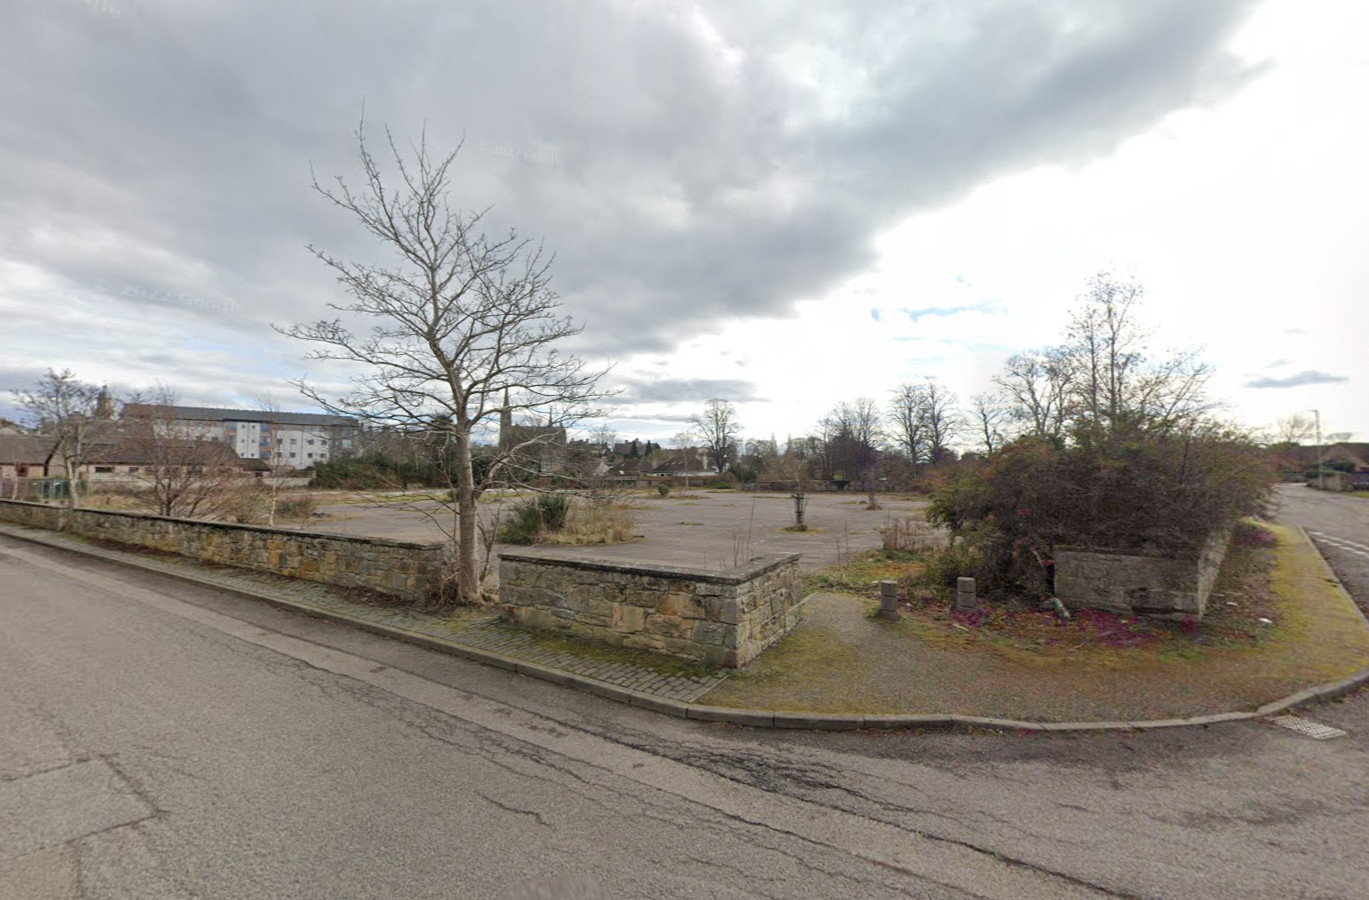 Plan for 48 new homes in Forres to go ahead after Scottish Government appeal